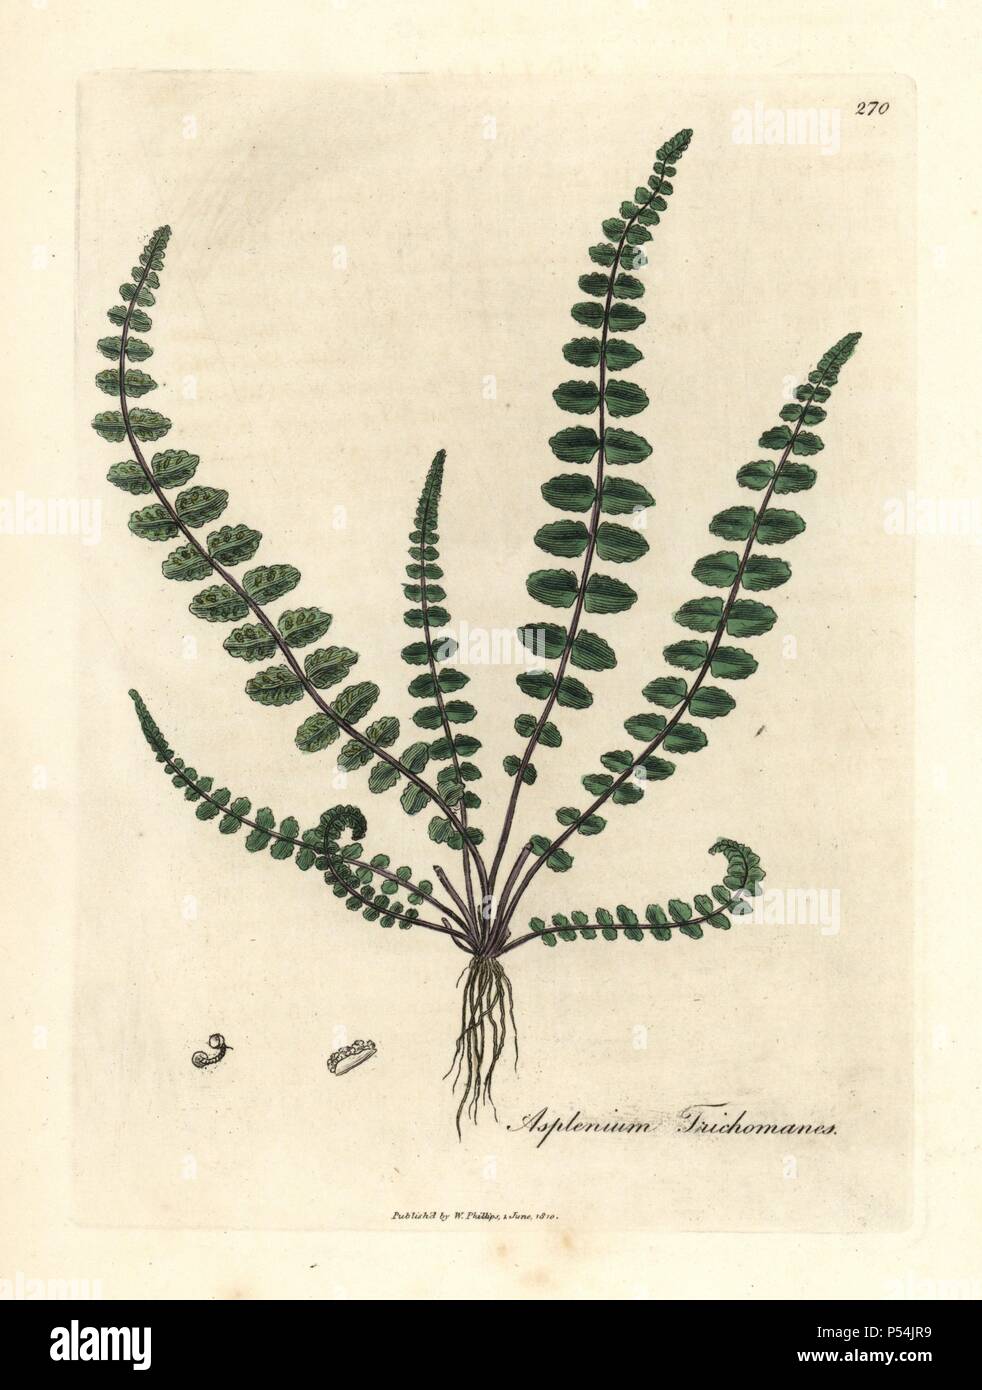 Common maidenhair fern or spleenwort, Asplenium trichomanes. Handcoloured copperplate engraving from a botanical illustration by James Sowerby from William Woodville and Sir William Jackson Hooker's 'Medical Botany,' John Bohn, London, 1832. The tireless Sowerby (1757-1822) drew over 2, 500 plants for Smith's mammoth 'English Botany' (1790-1814) and 440 mushrooms for 'Coloured Figures of English Fungi ' (1797) among many other works. Stock Photo